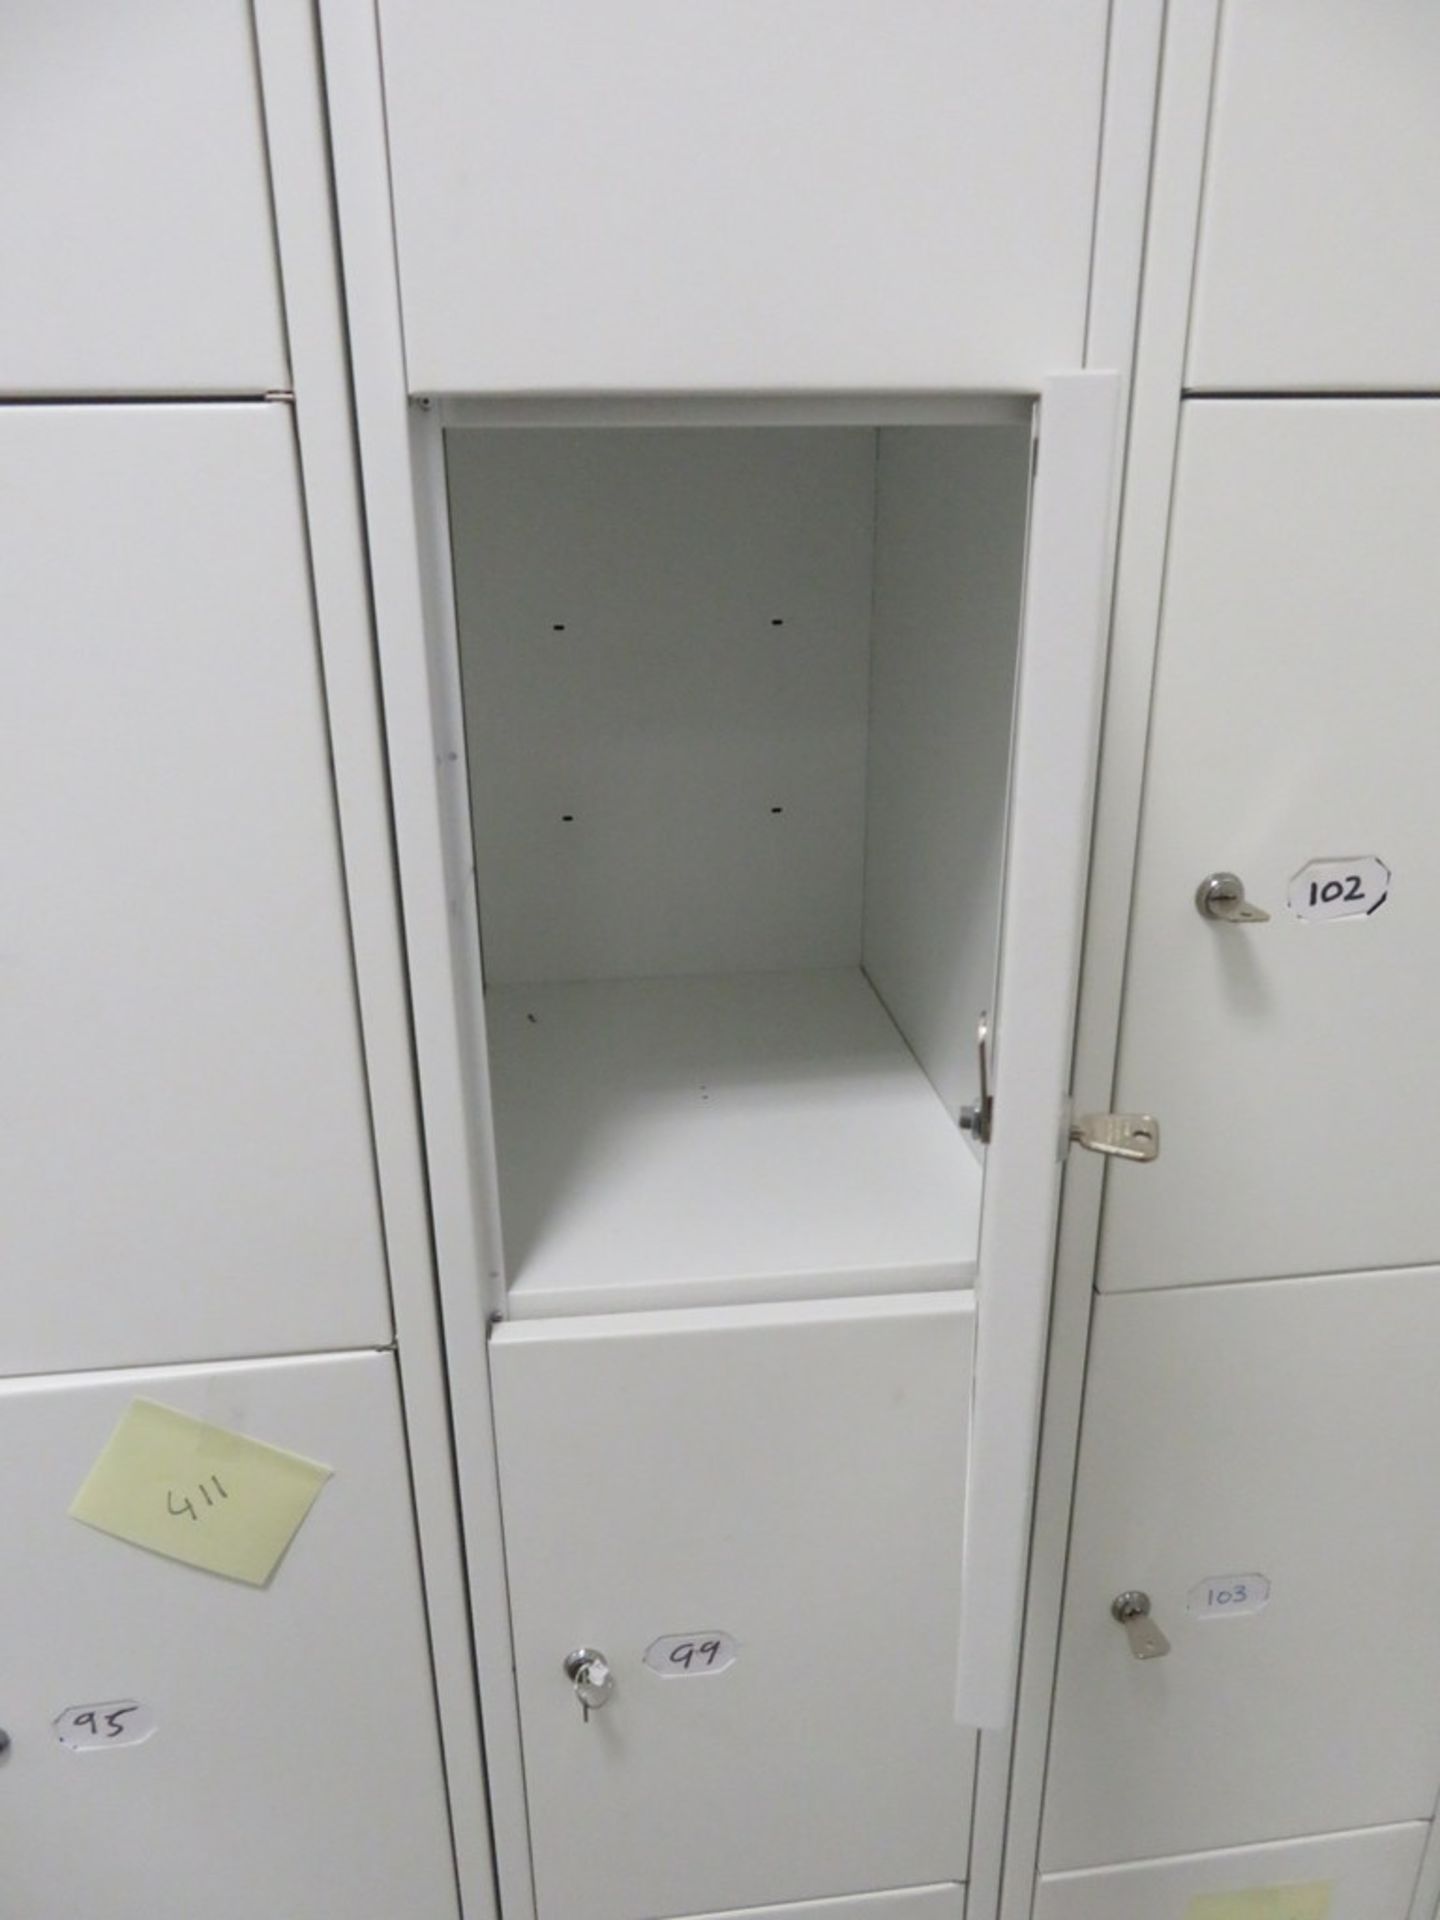 4x Bisley 4 Compartment Personnel Locker. - Image 3 of 3